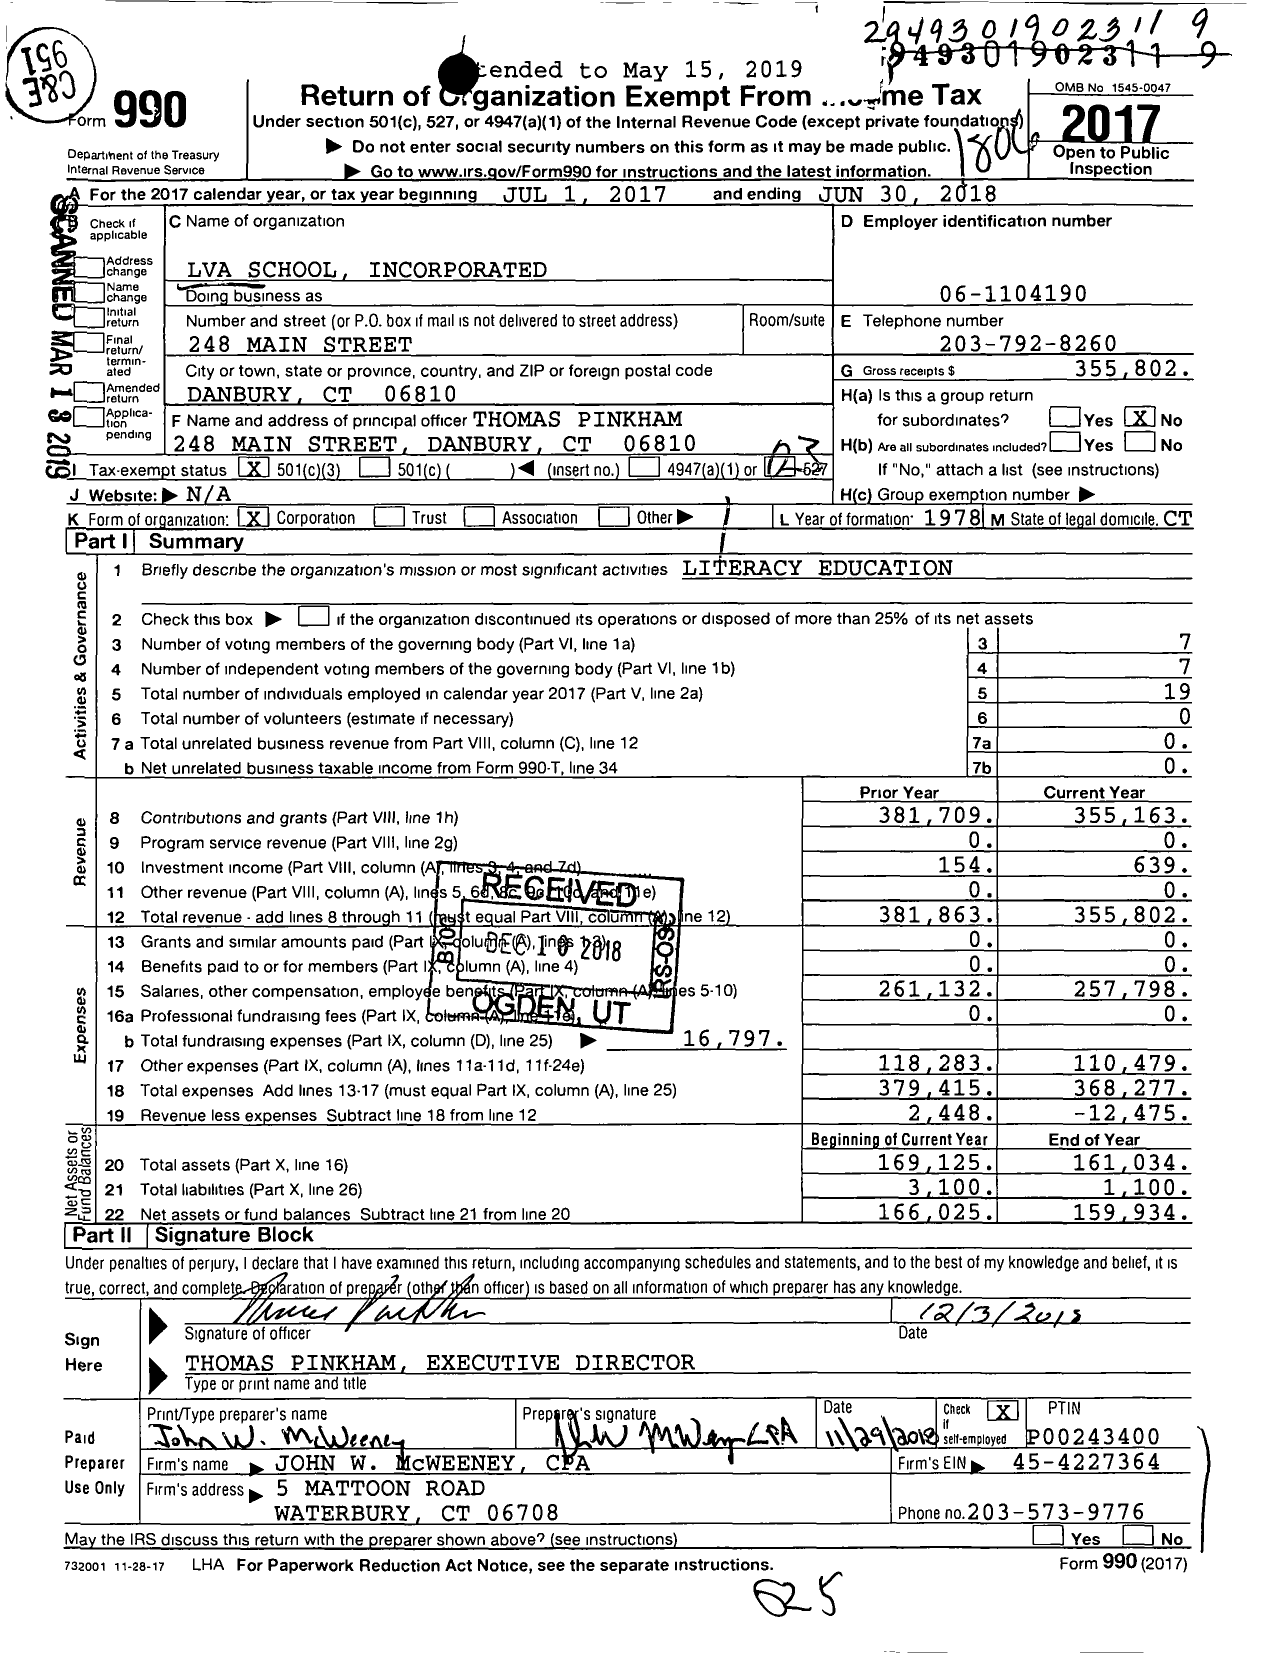 Image of first page of 2017 Form 990 for Lva School Incorporated